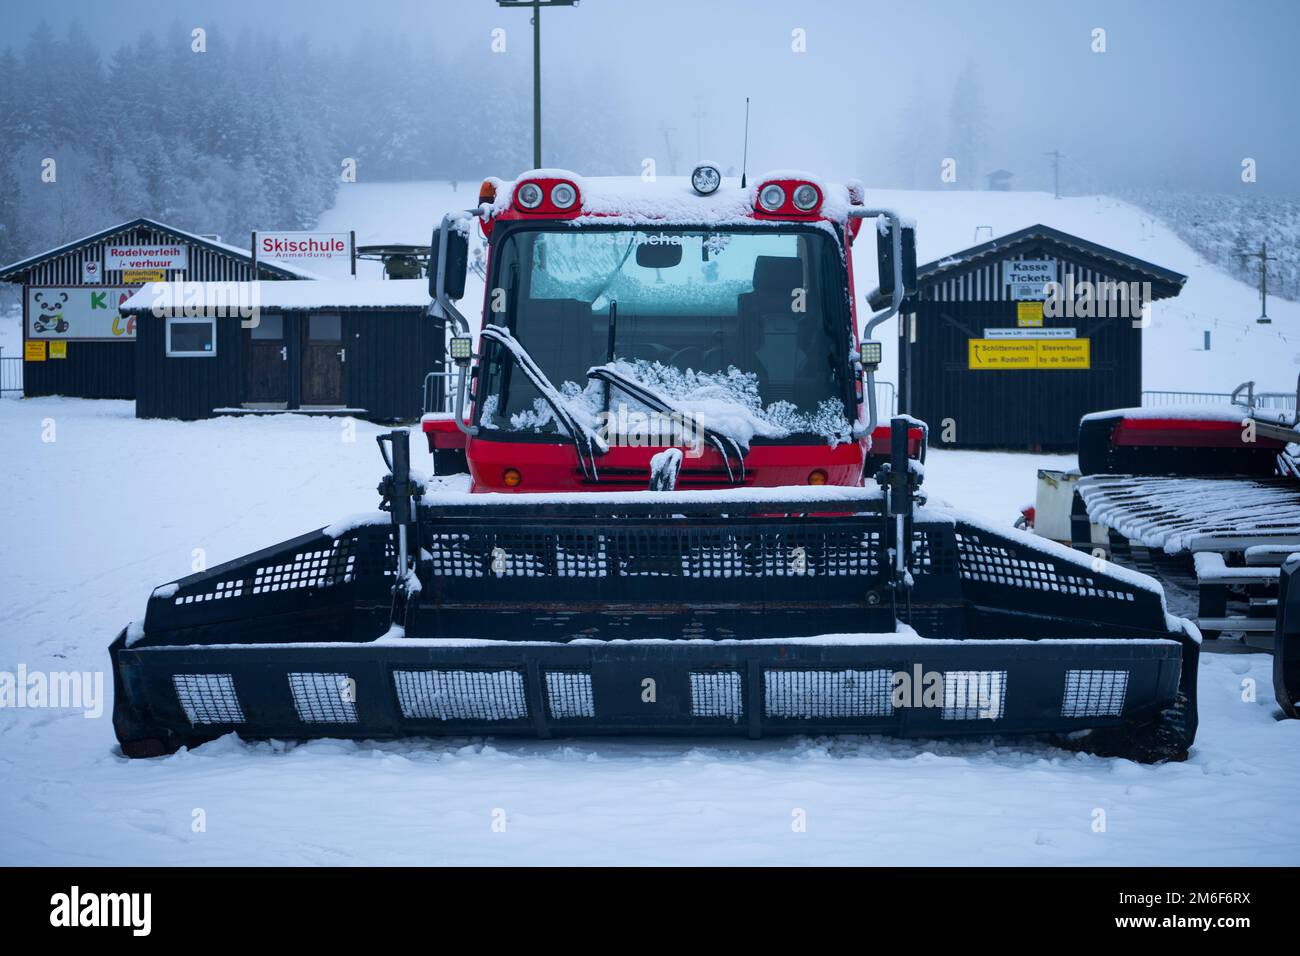 Frontal view of a snowcat in front of a ski slope Stock Photo